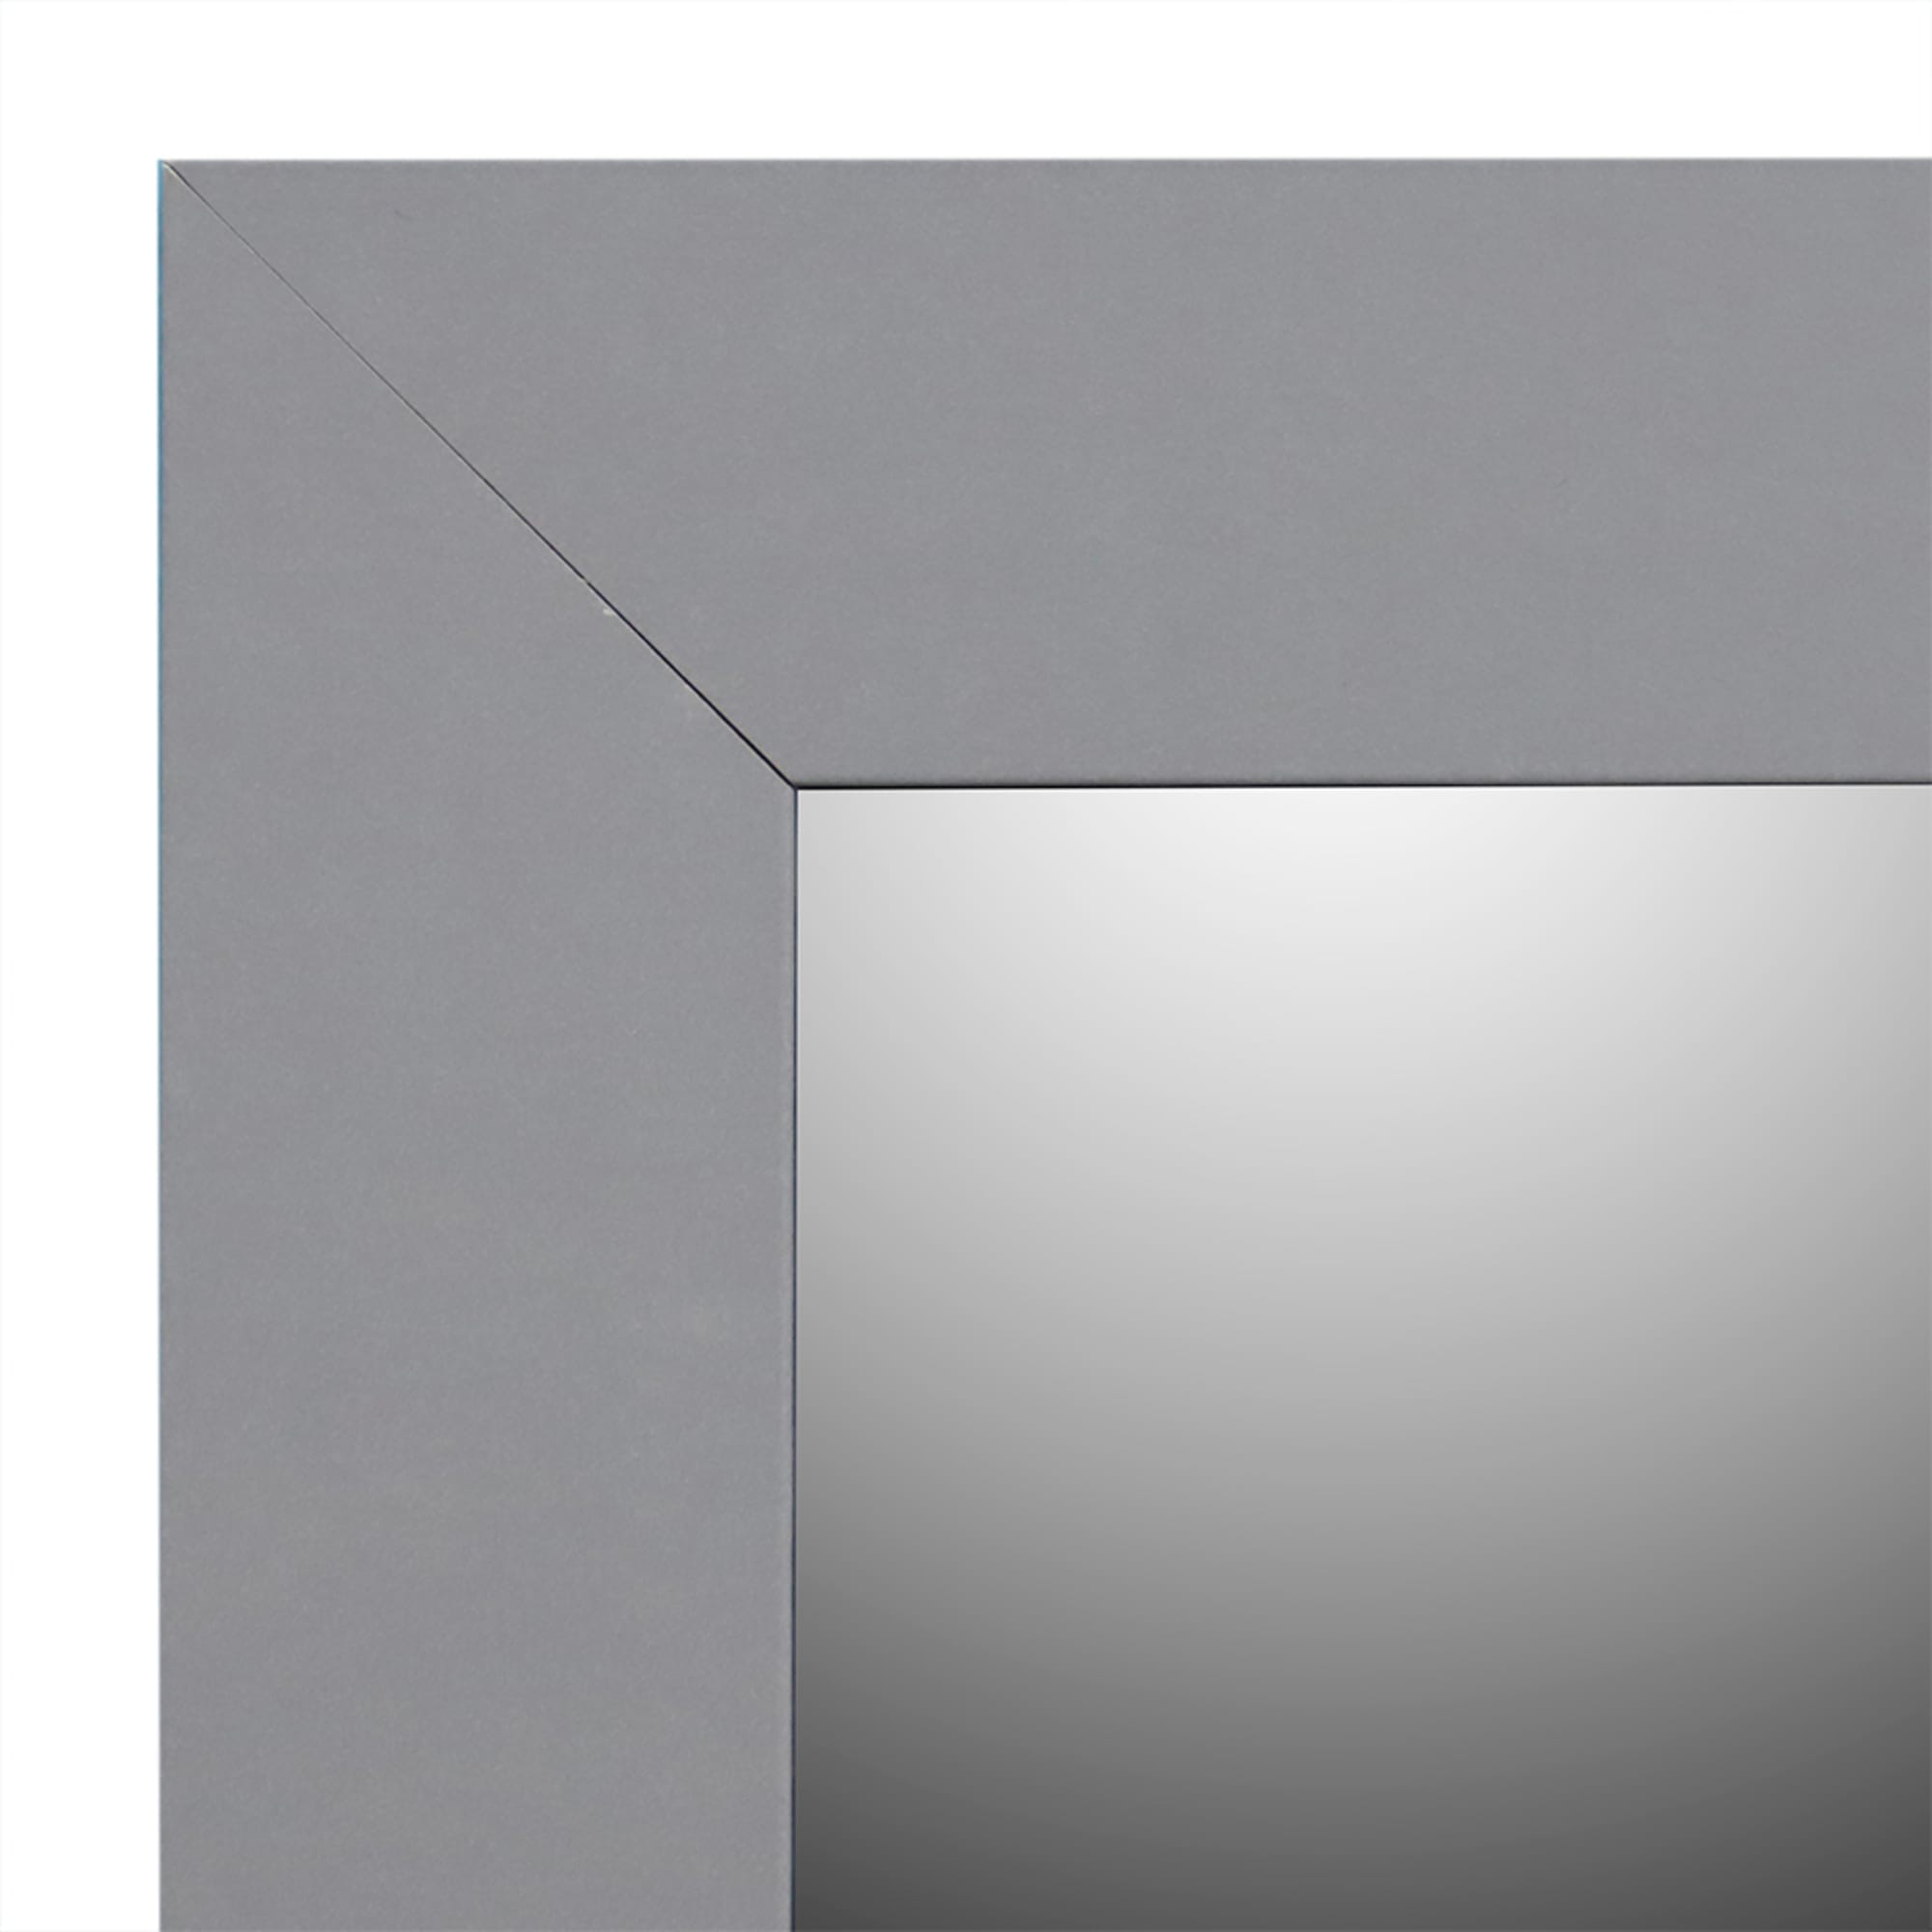 Home Basics Framed Painted MDF 18” x 24” Wall Mirror, Grey $10.00 EACH, CASE PACK OF 6